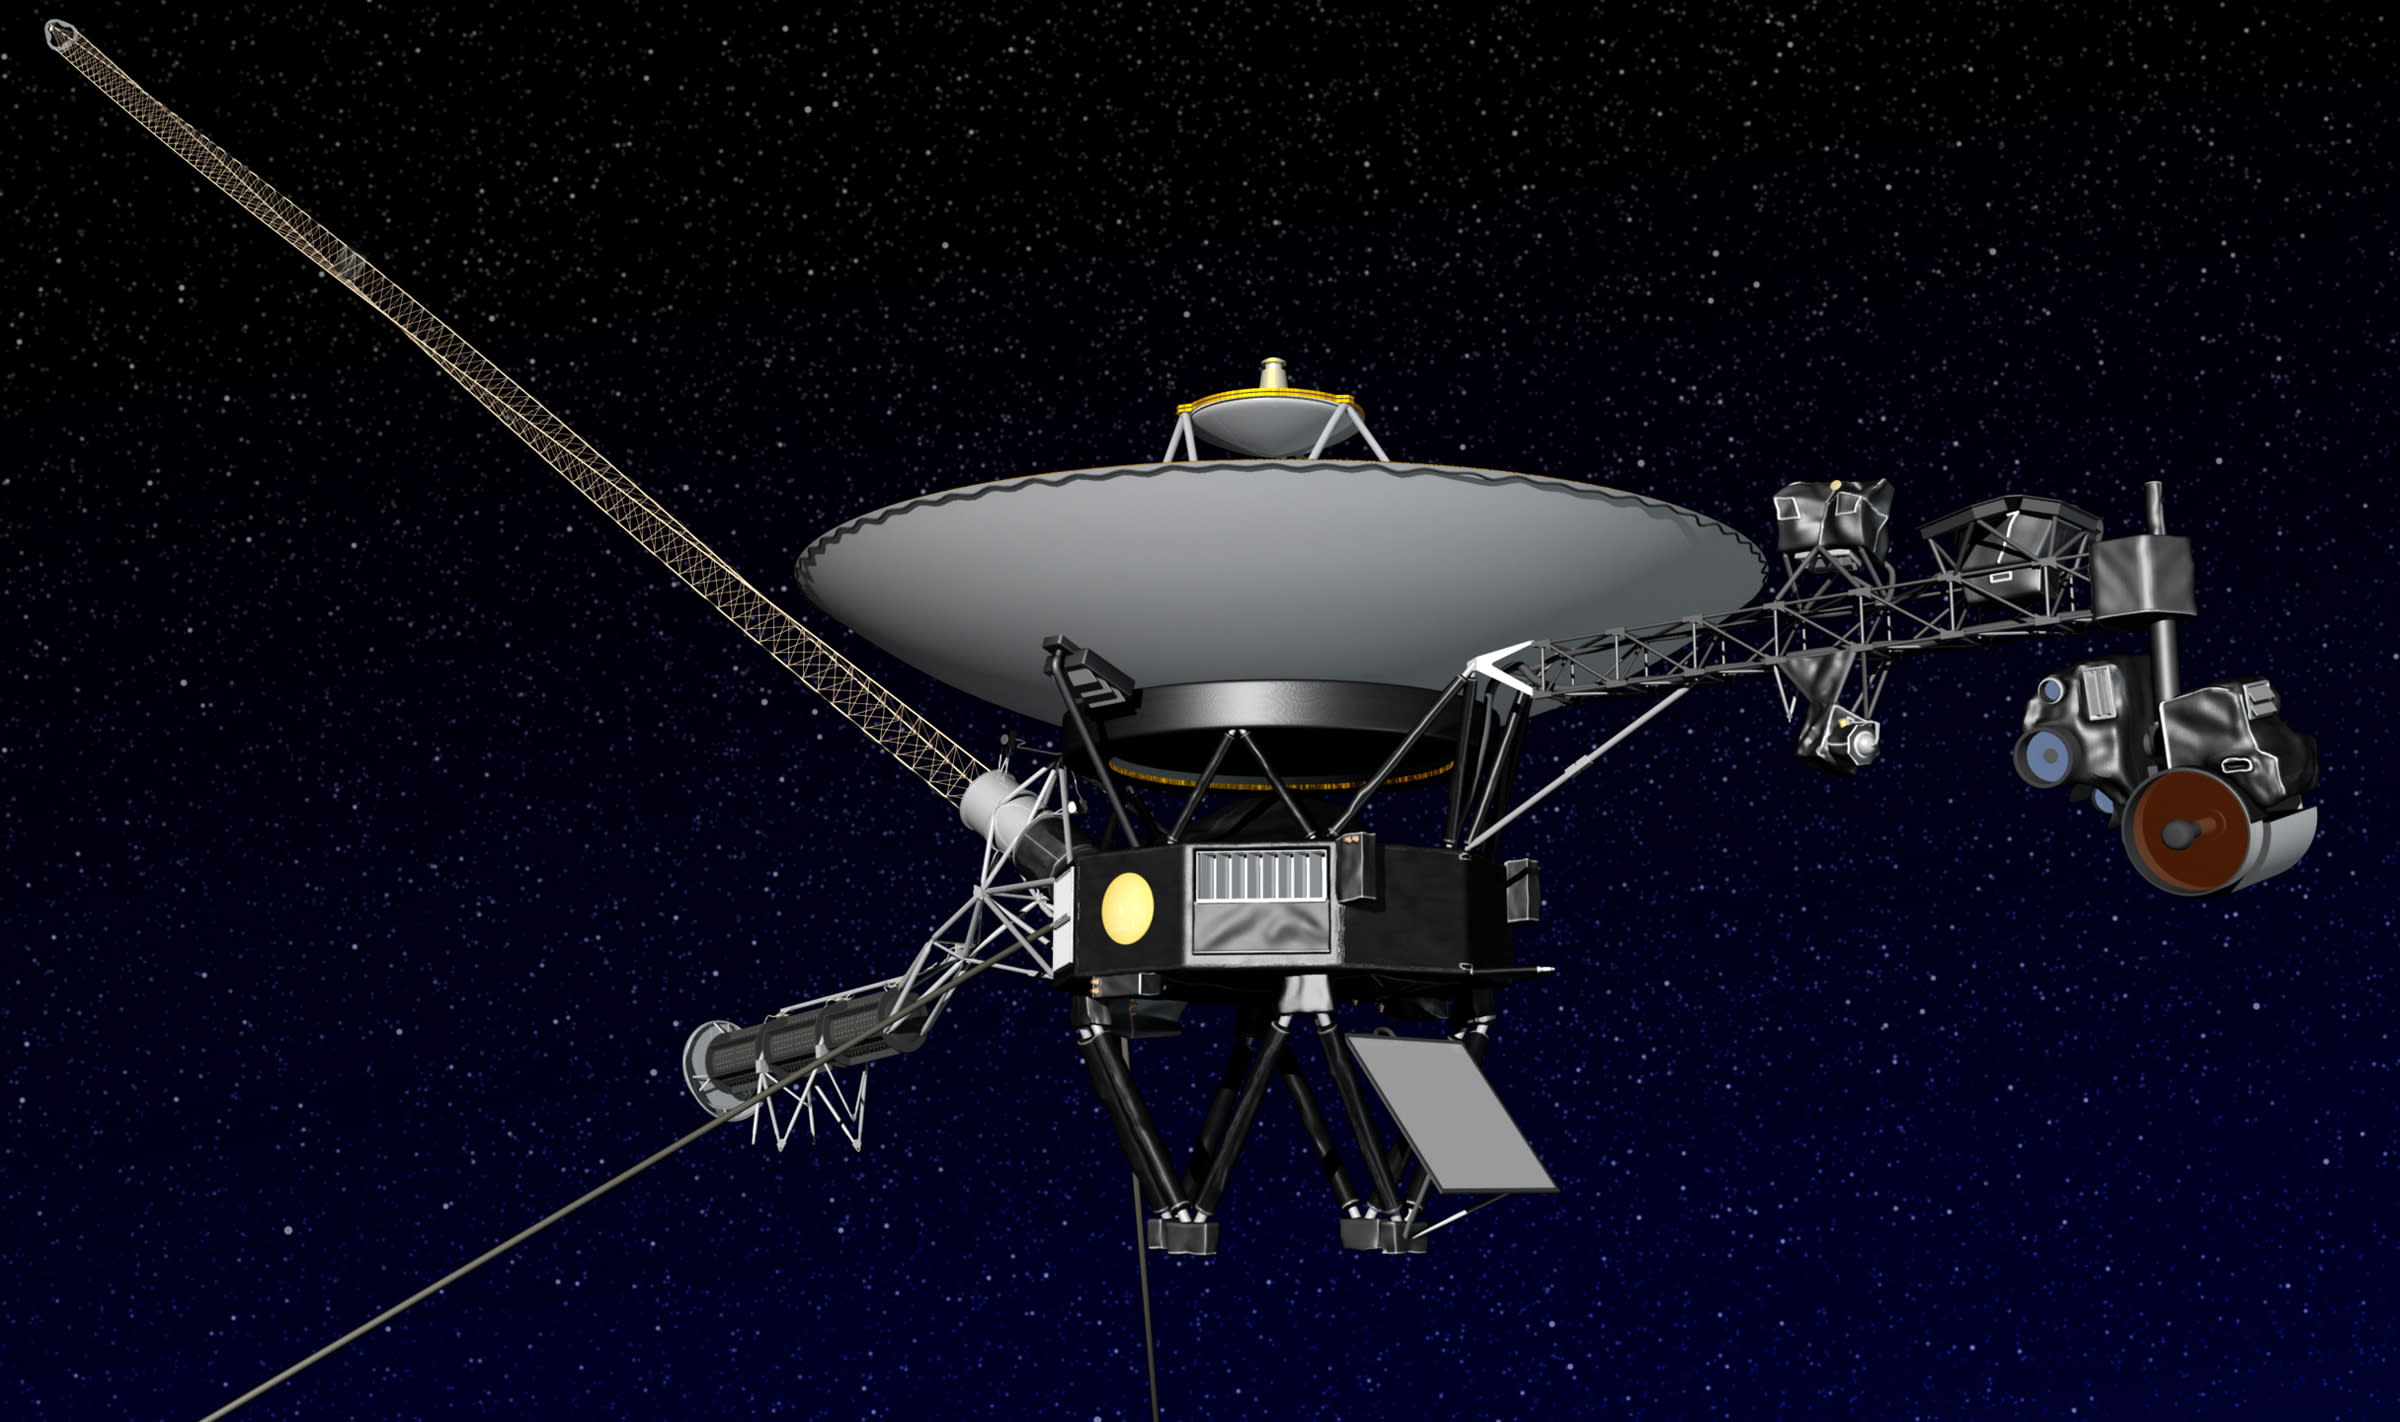 voyager space probe